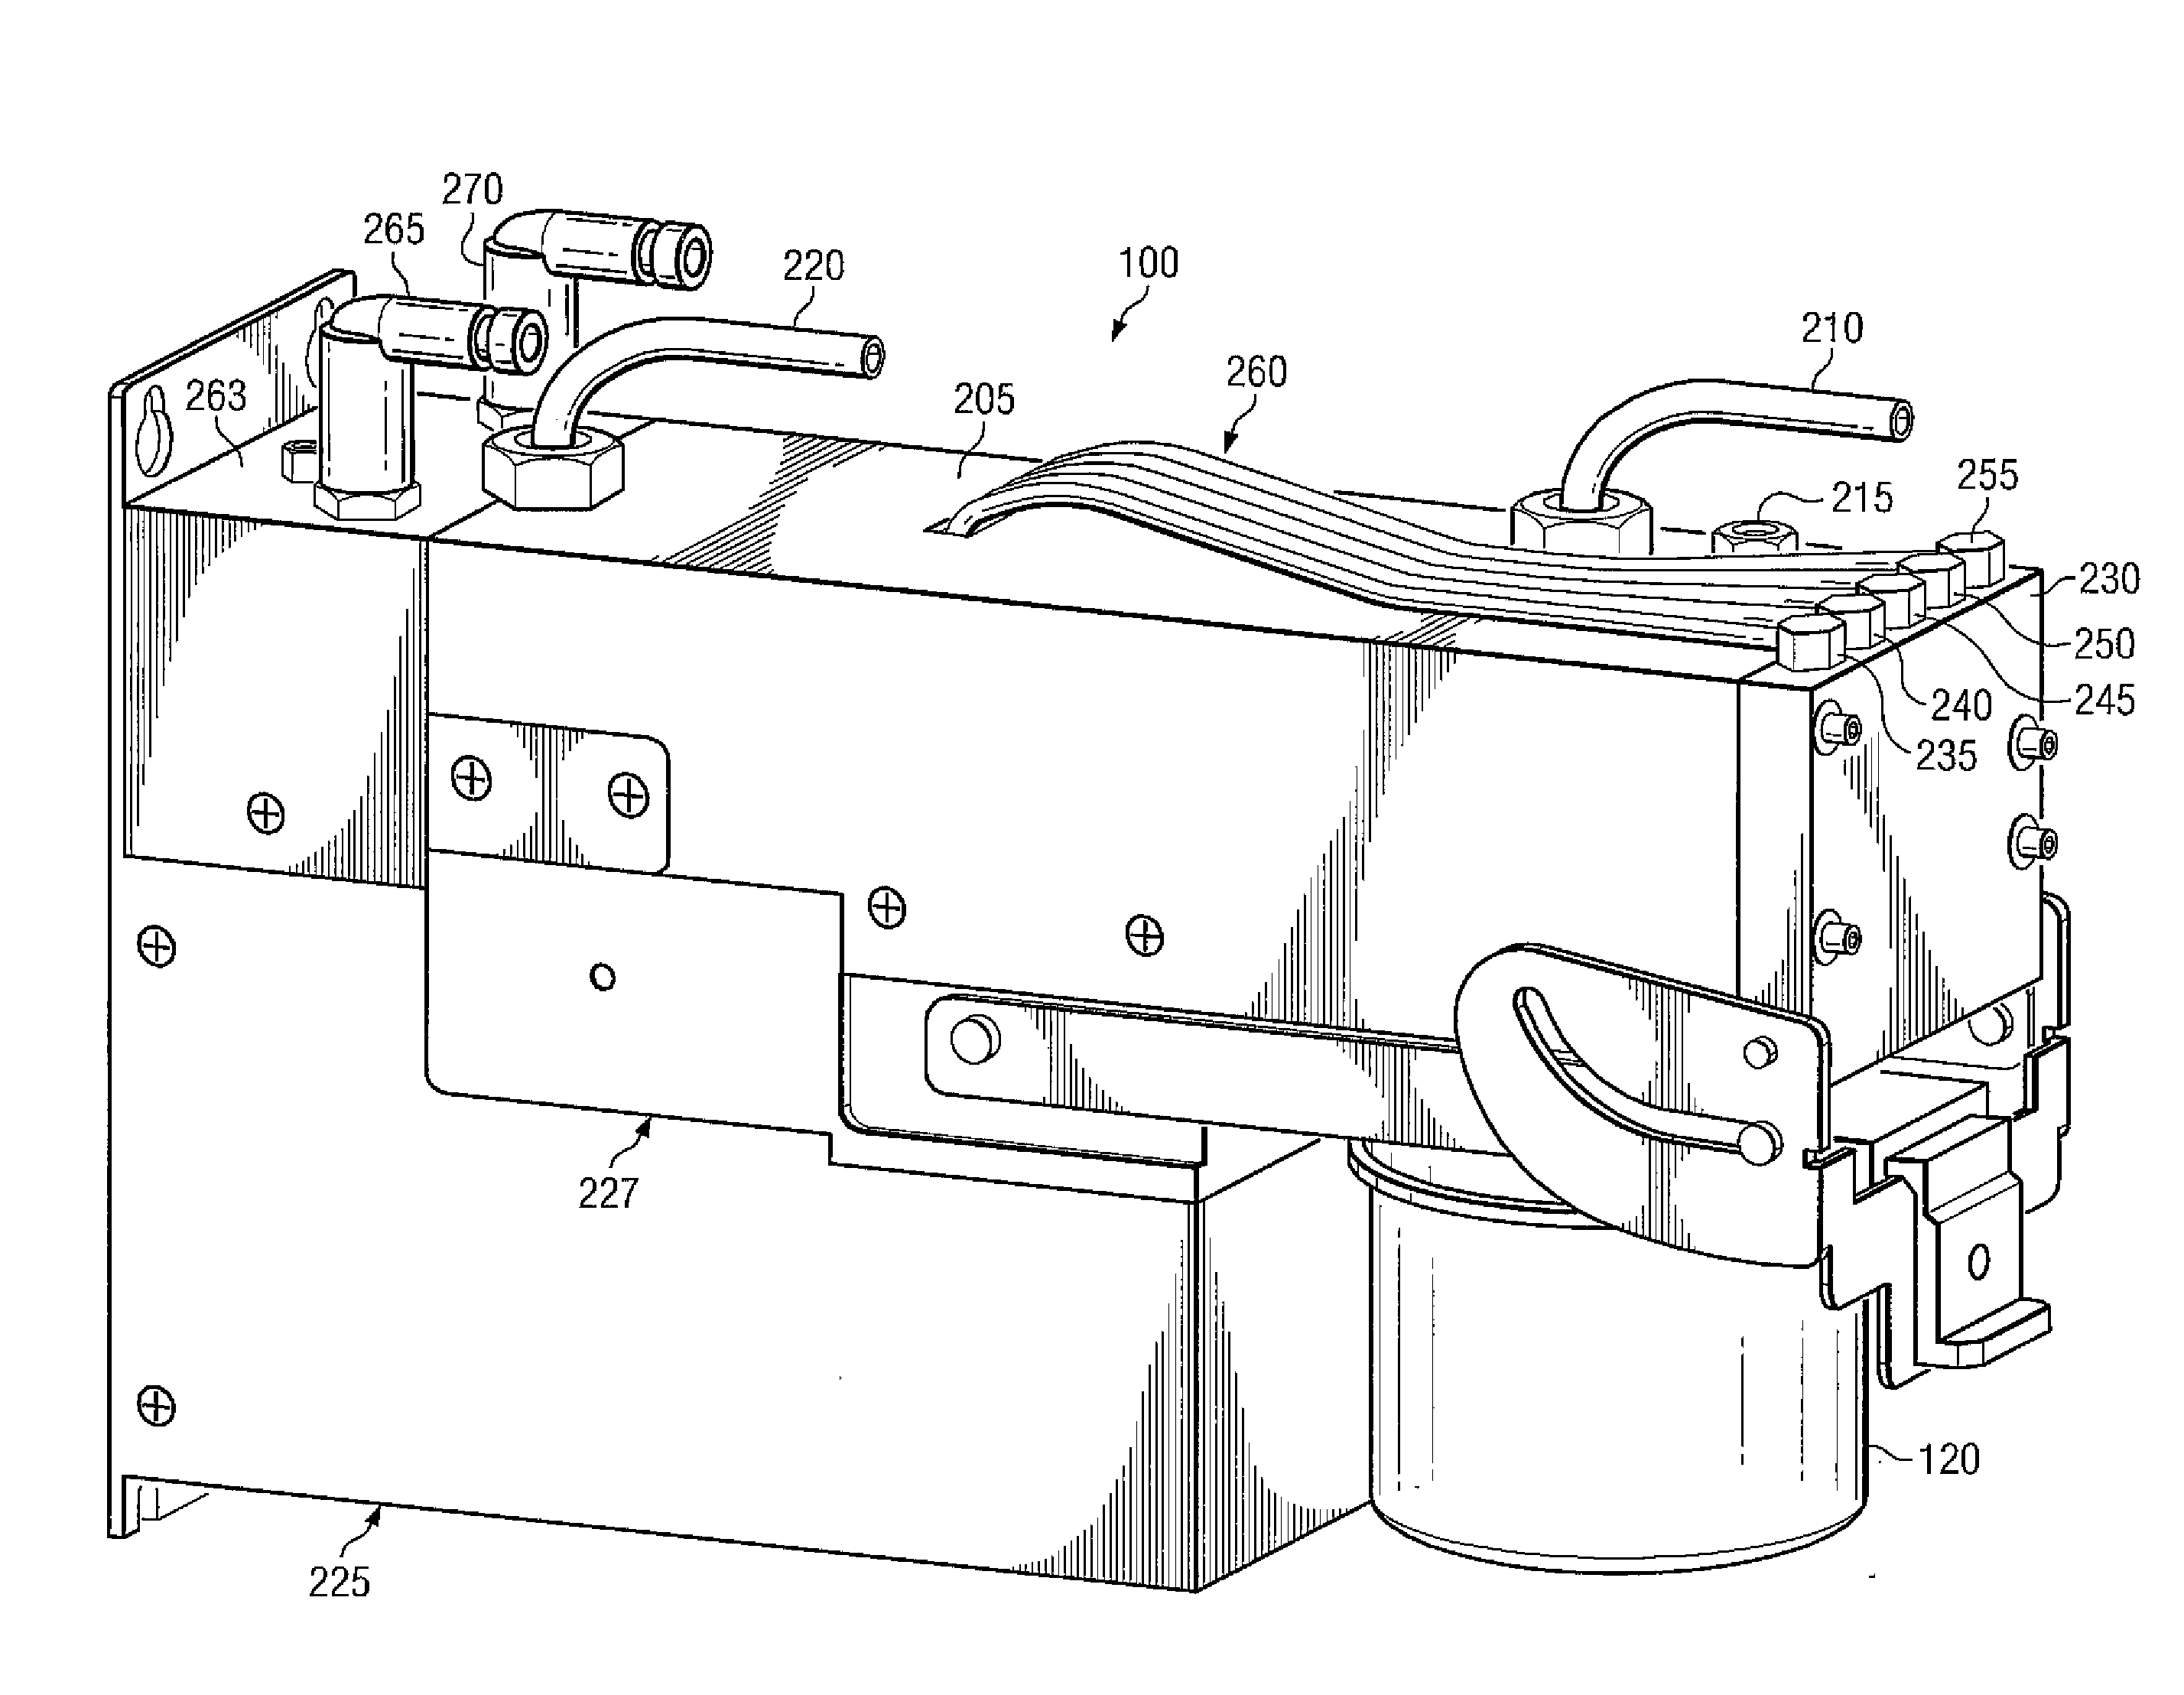 System and method for operation of a pump